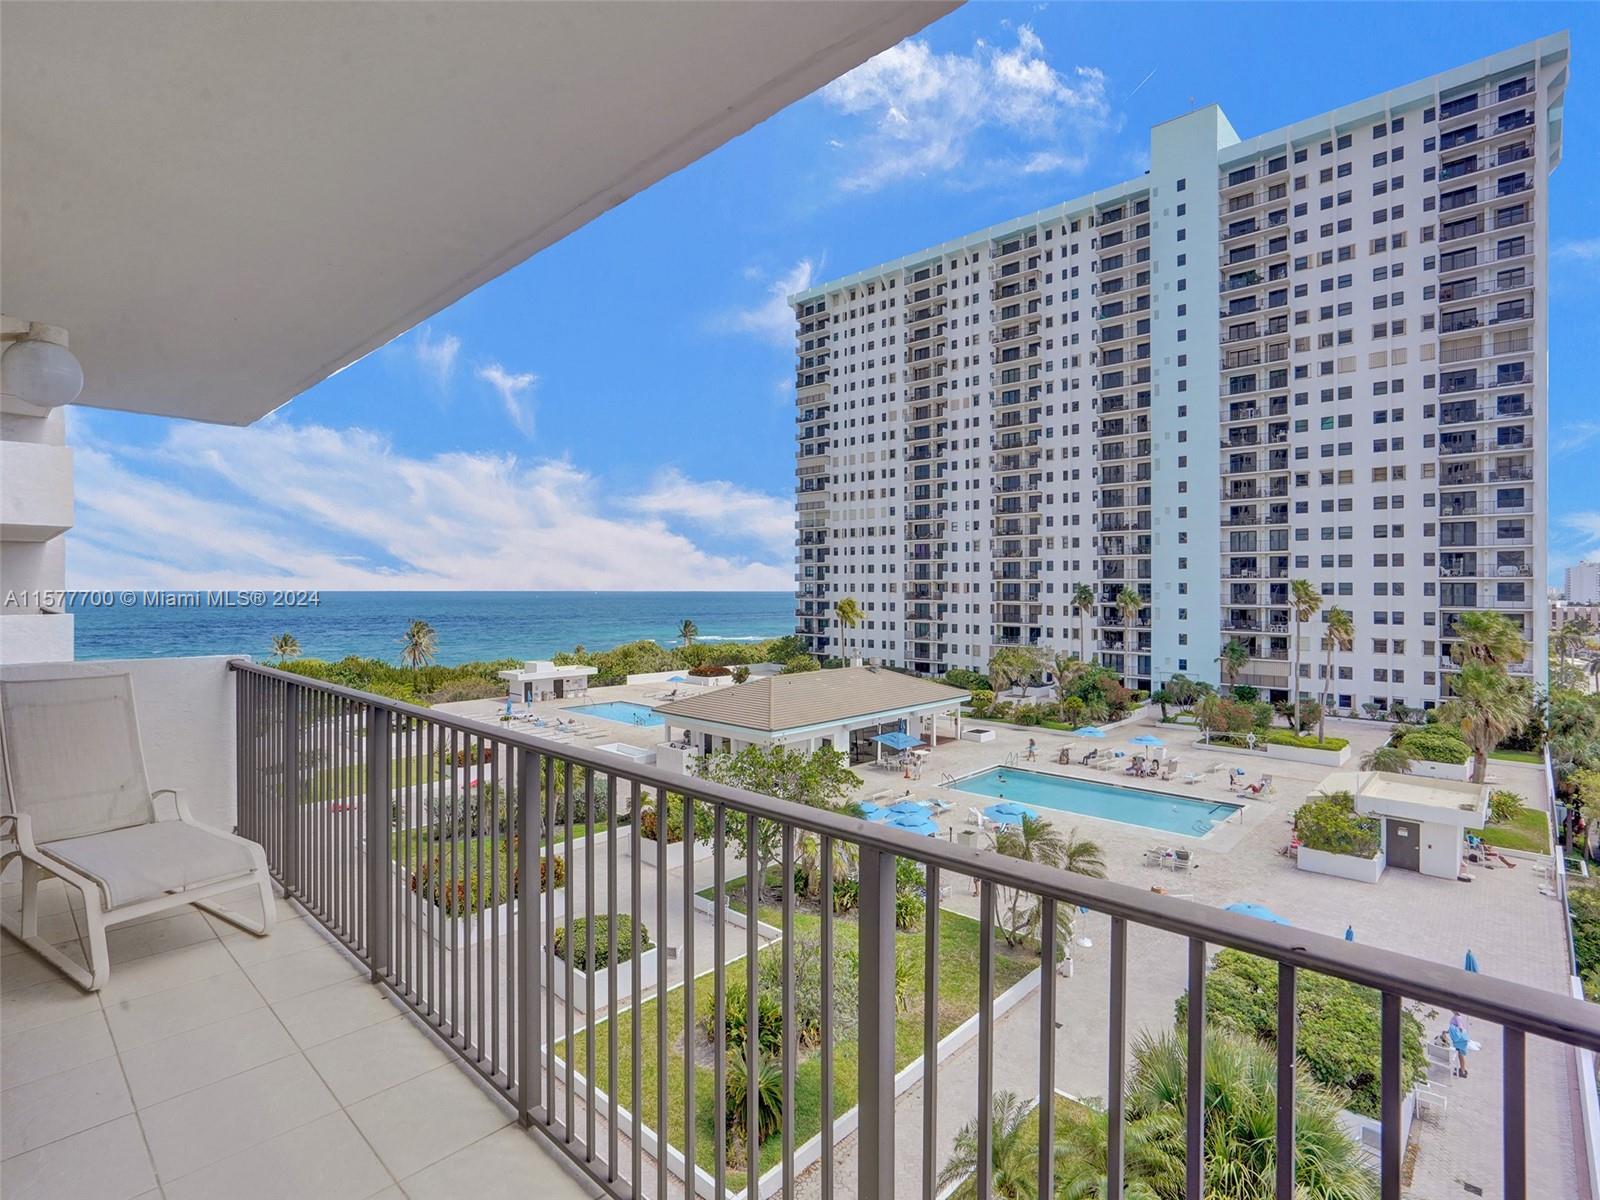 ENJOY POOL, OCEAN AND INTRACOASTAL VIEWS FROM THIS LIGHT, BRIGHT AND AIRY UNIT. CORNER UNIT FEATURES NUMEROUS WINDOWS FOR EXPANSIVE VIEWS AND LOTS OF SUNSHINE. SOUTH FACING, ALMOST 2,000 SQ FT WITH MARBLE TILE FLOORS, OVERSIZED CLOSETS AND PRIVATE LAUNDRY ROOM FEATURING WASHER, DRYER AND EXTRA STORAGE. THE SUMMIT BOASTS TWO HEATED POOLS, TWO TENNIS COURTS, RESTAURANT, COUNTRY CLUB LIFESTYLE, CARD ROOMS, GYM & SAUNA, PICKLEBALL, PUTTING GREEN, BASKETBALL COURT AND MANY SOCIAL ACTIVITIES. 10 MINUTES FROM FLL, AVENTURA AND GULFSTREAM.